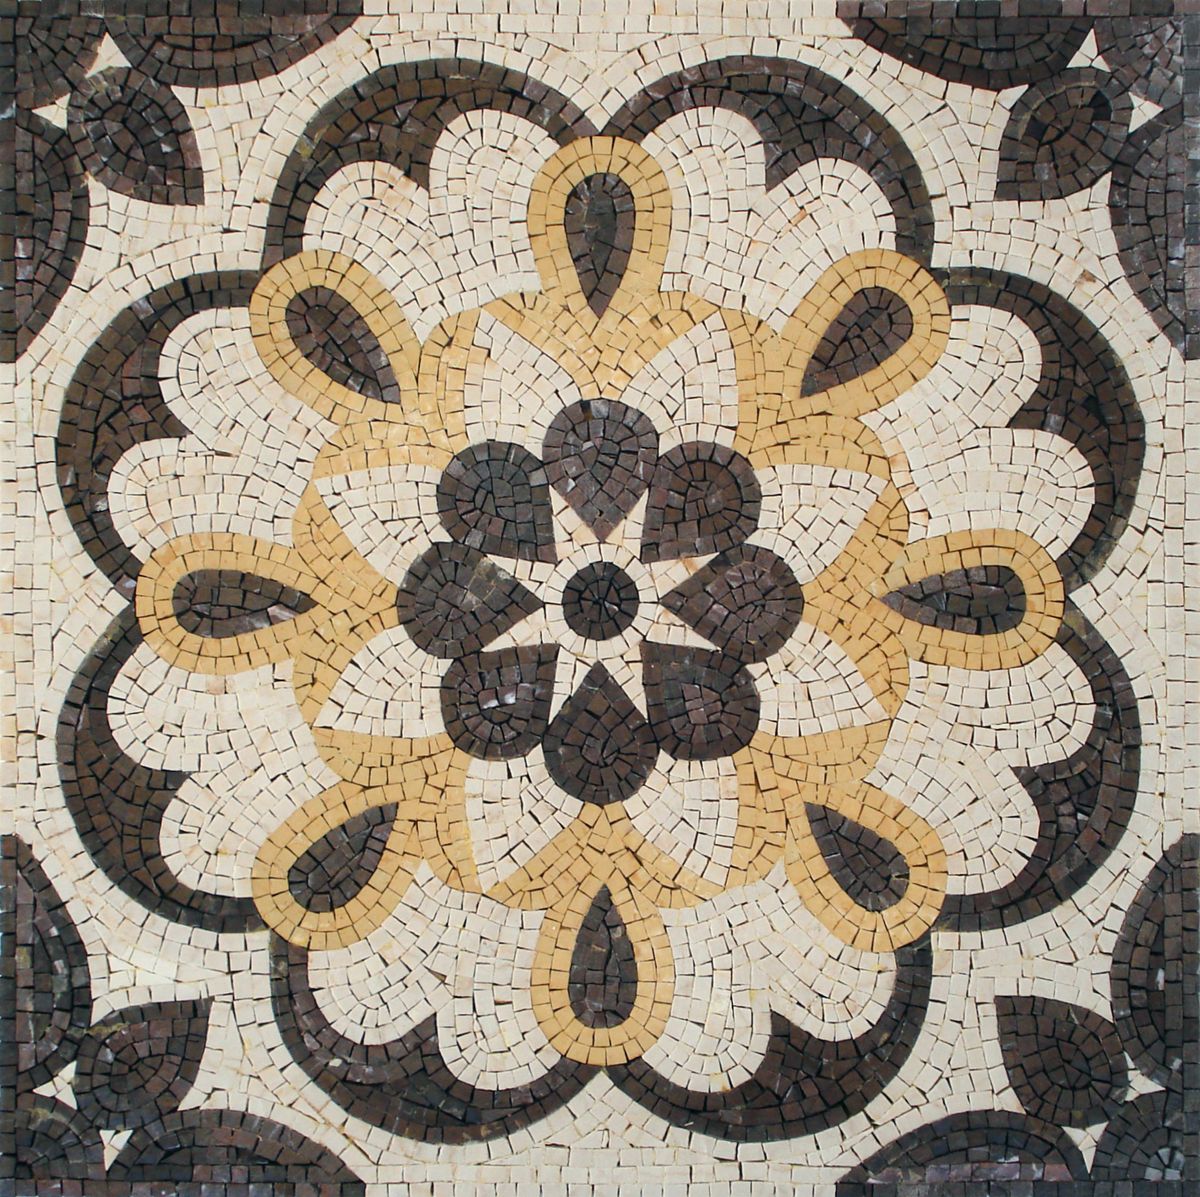 This handcrafted mosaic features a mod-inspired flower pattern. Perfect for adding a fashionable touch to your space, this mosaic is fun and chic with shades of gold and dark brown-black. mosaicnatural.com/mosaics/sq008 #mosaic #mosaicnatural #mosaicart #handmade #handmadeart